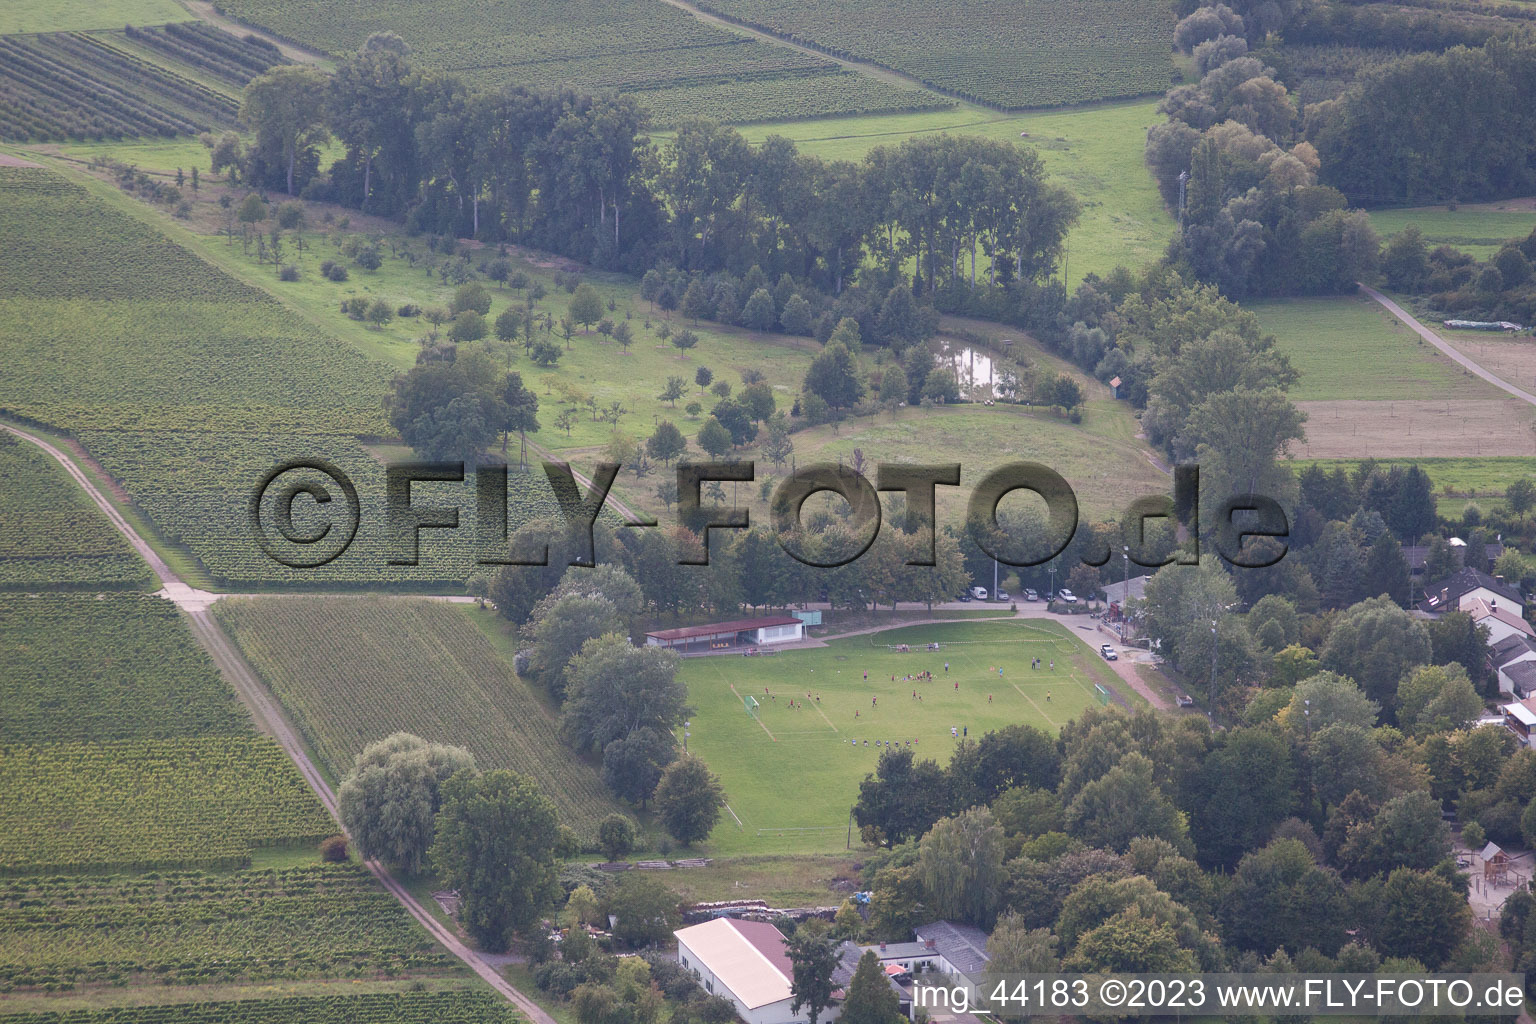 District Wollmesheim in Landau in der Pfalz in the state Rhineland-Palatinate, Germany from the drone perspective